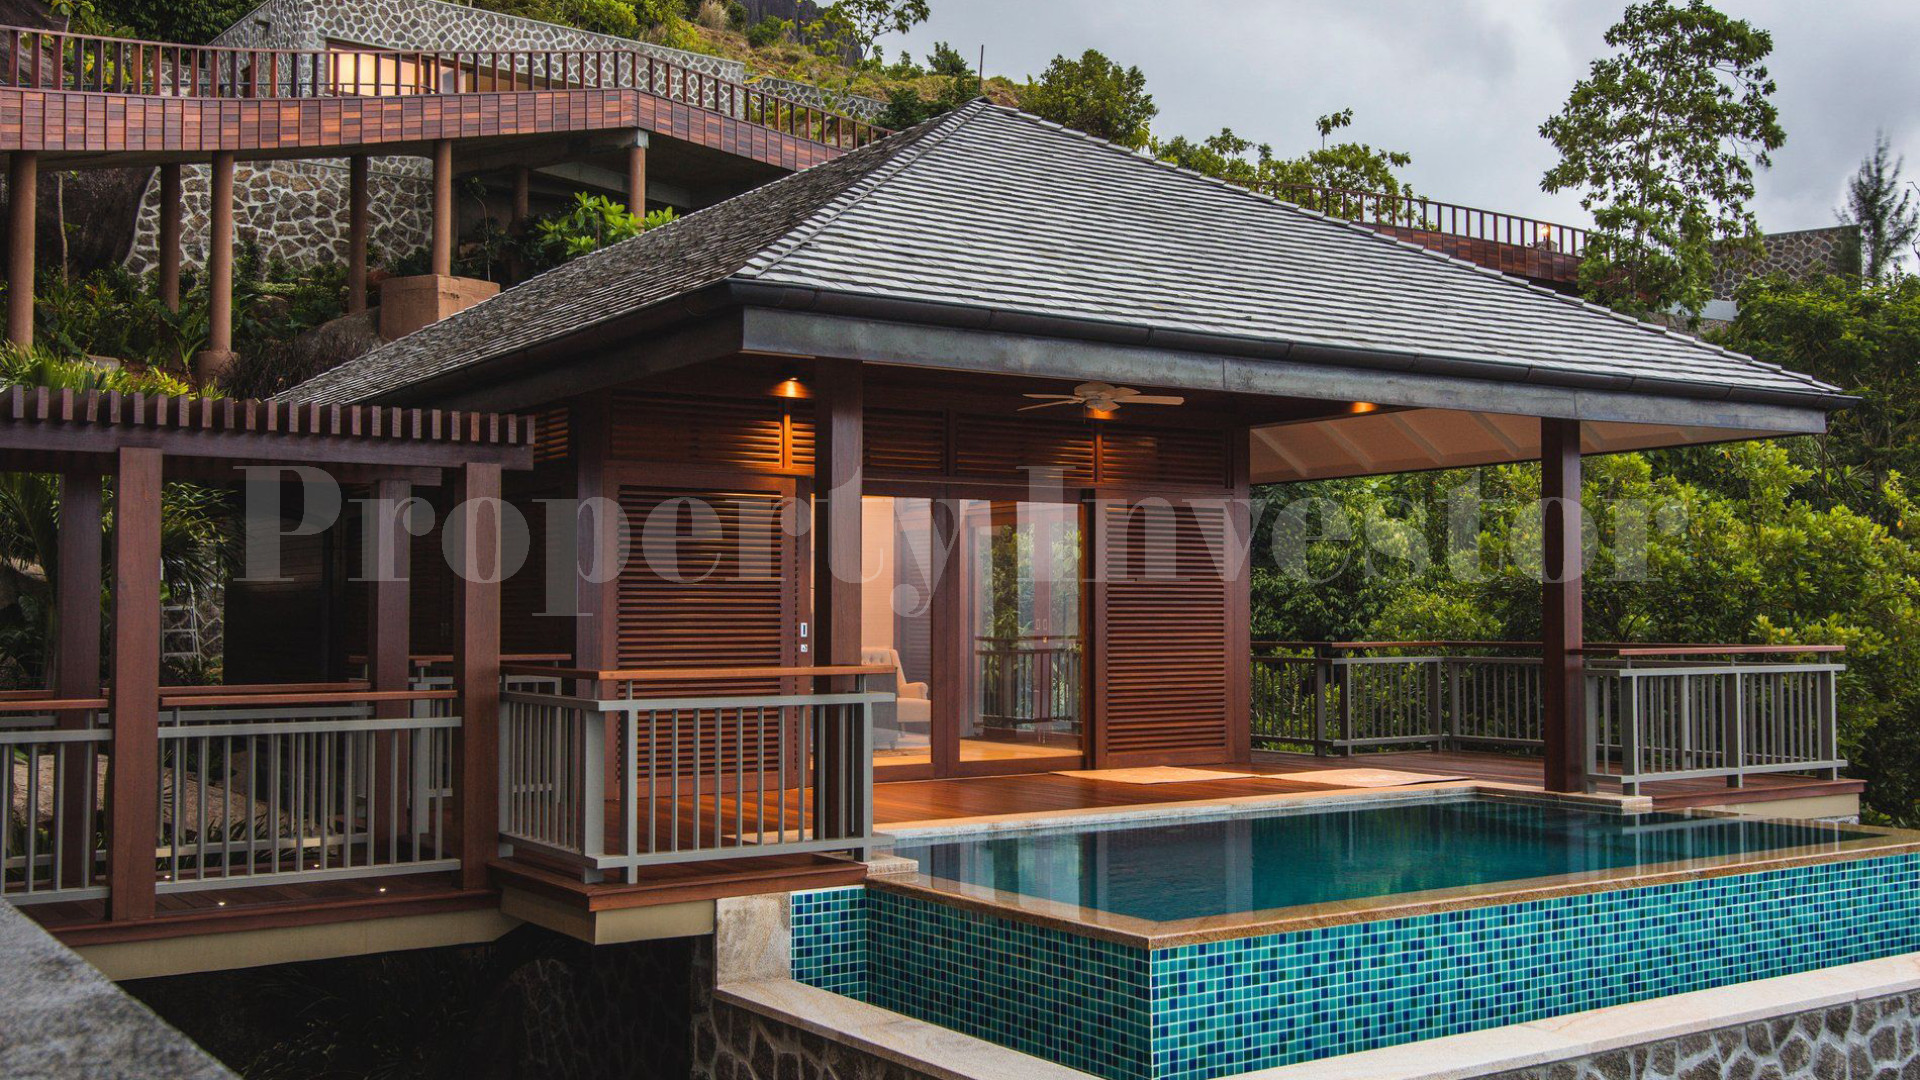 Stunning 6 Bedroom Contemporary Luxury Tropical Hilltop Villa with Breathtaking Ocean Views for Sale in Mahé, Seychelles